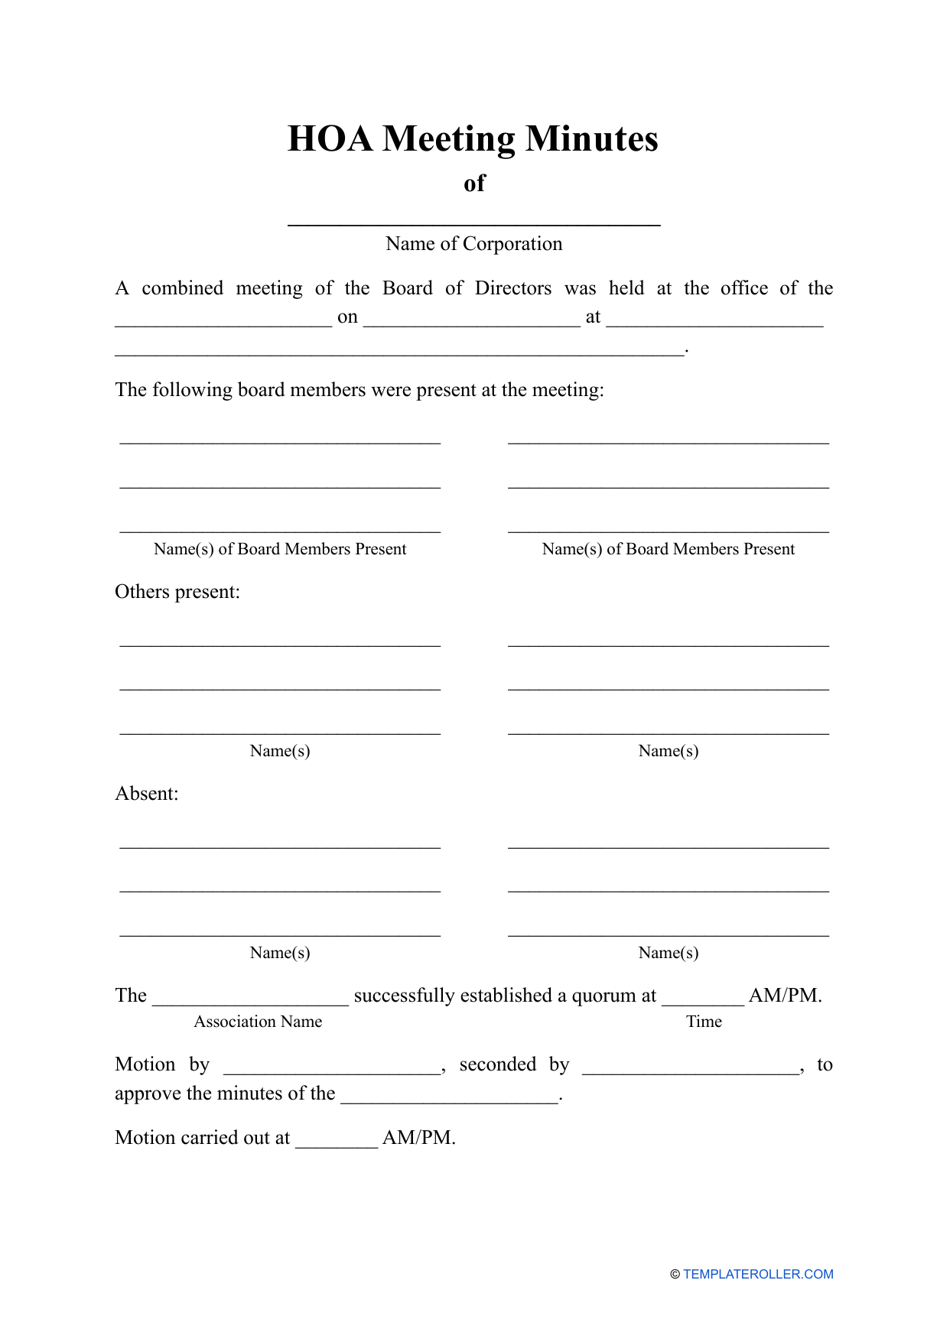 hoa-meeting-minutes-template-fill-out-sign-online-and-download-pdf-templateroller